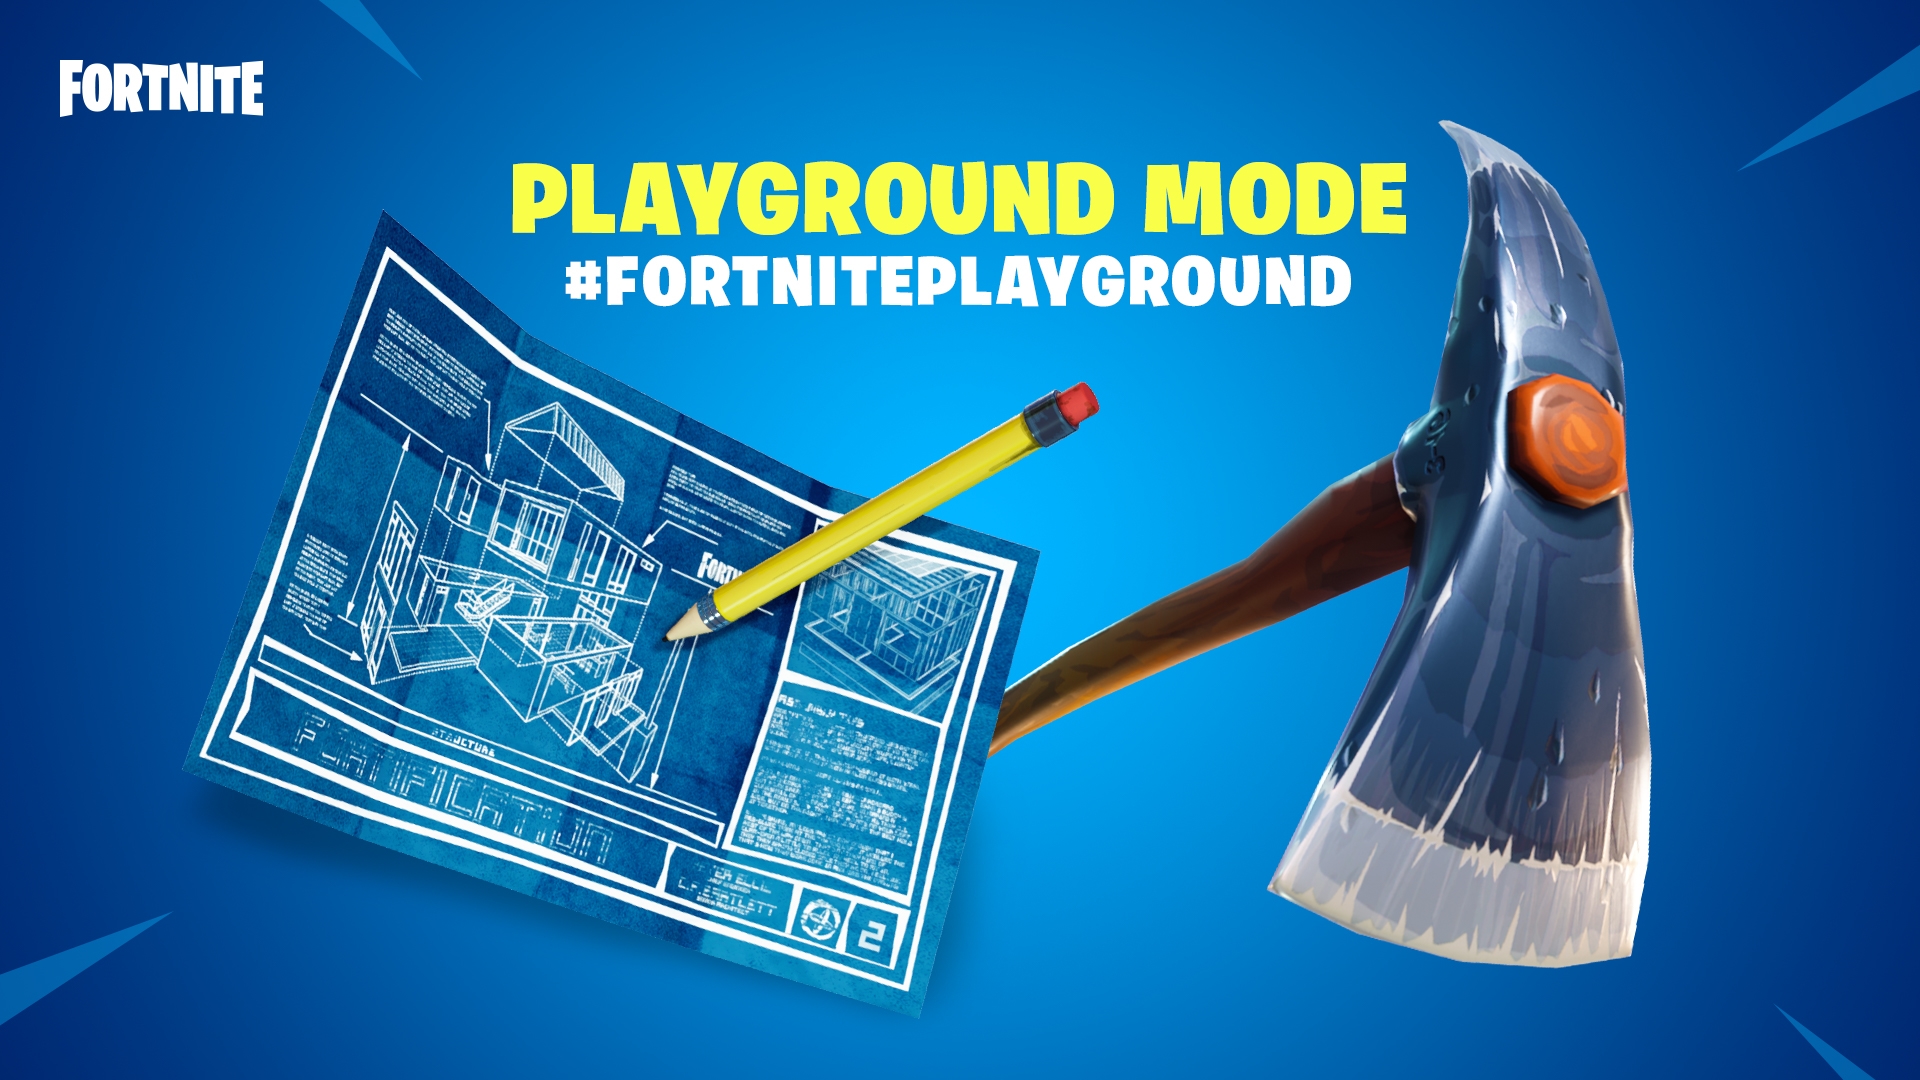 'Fortnite' gets a four-player Playground practice mode | DeviceDaily.com